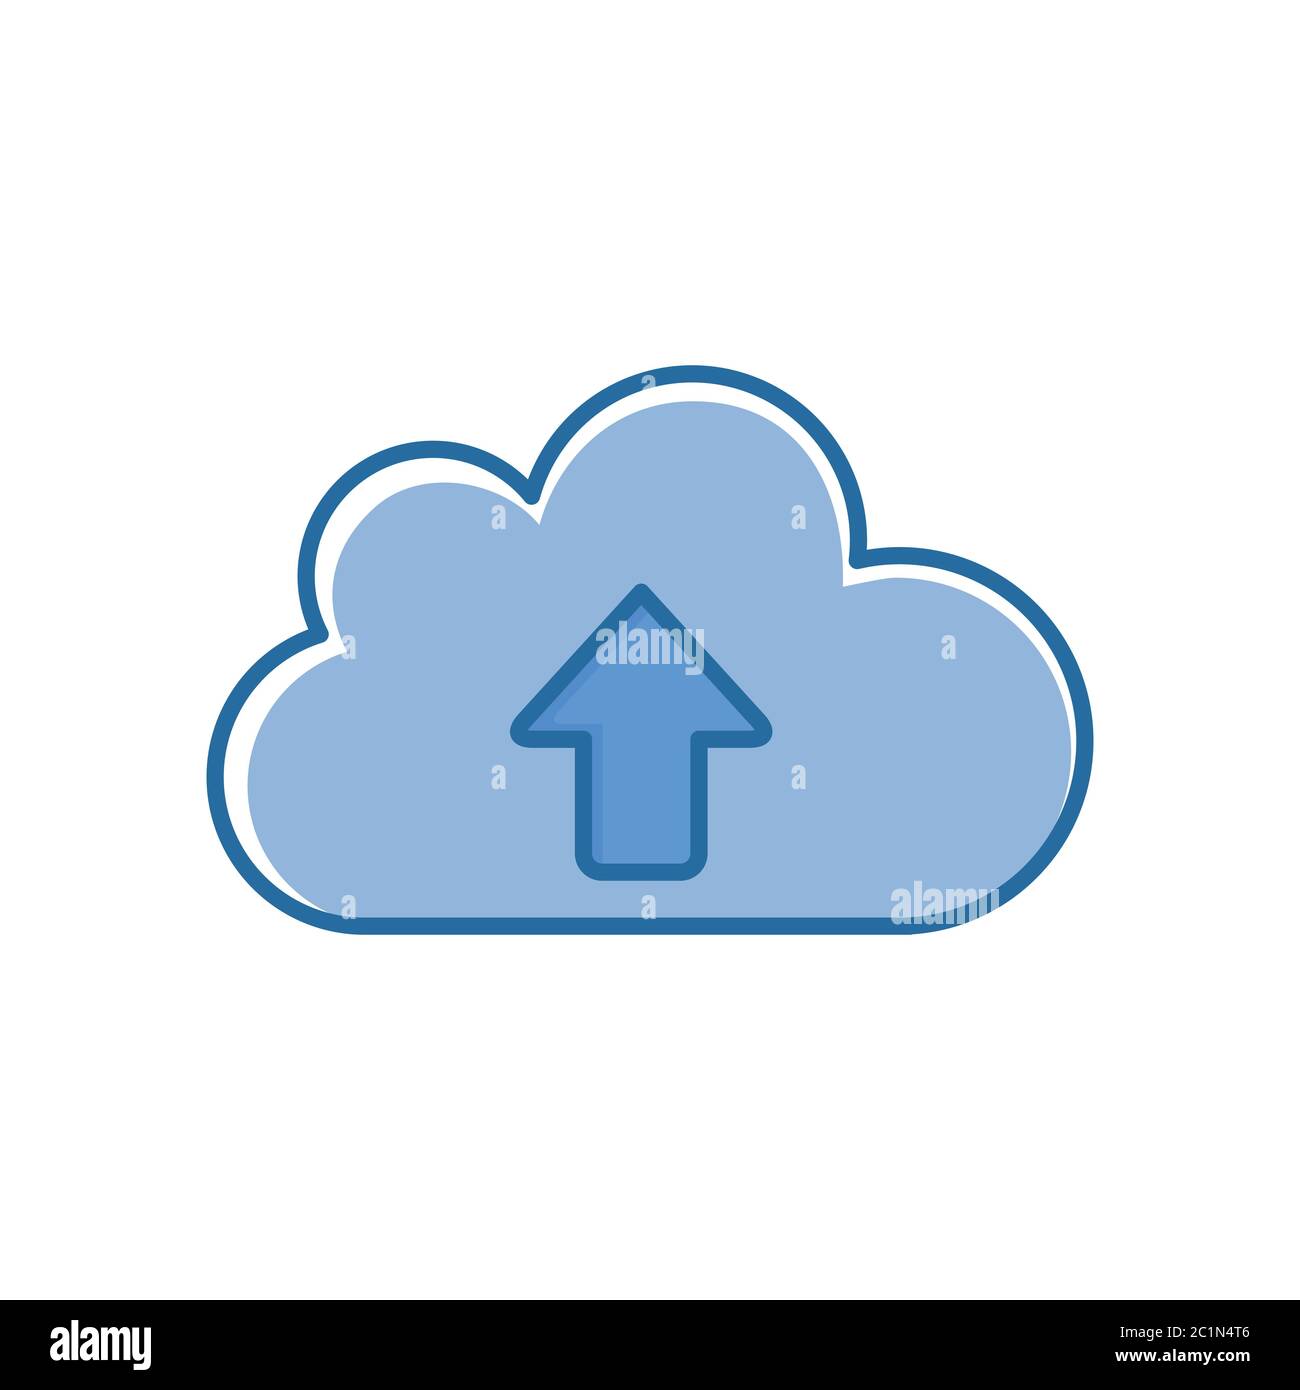 Vector illustration of cloud computing system technology. Upload a file to cloud storage icon. Stock Vector